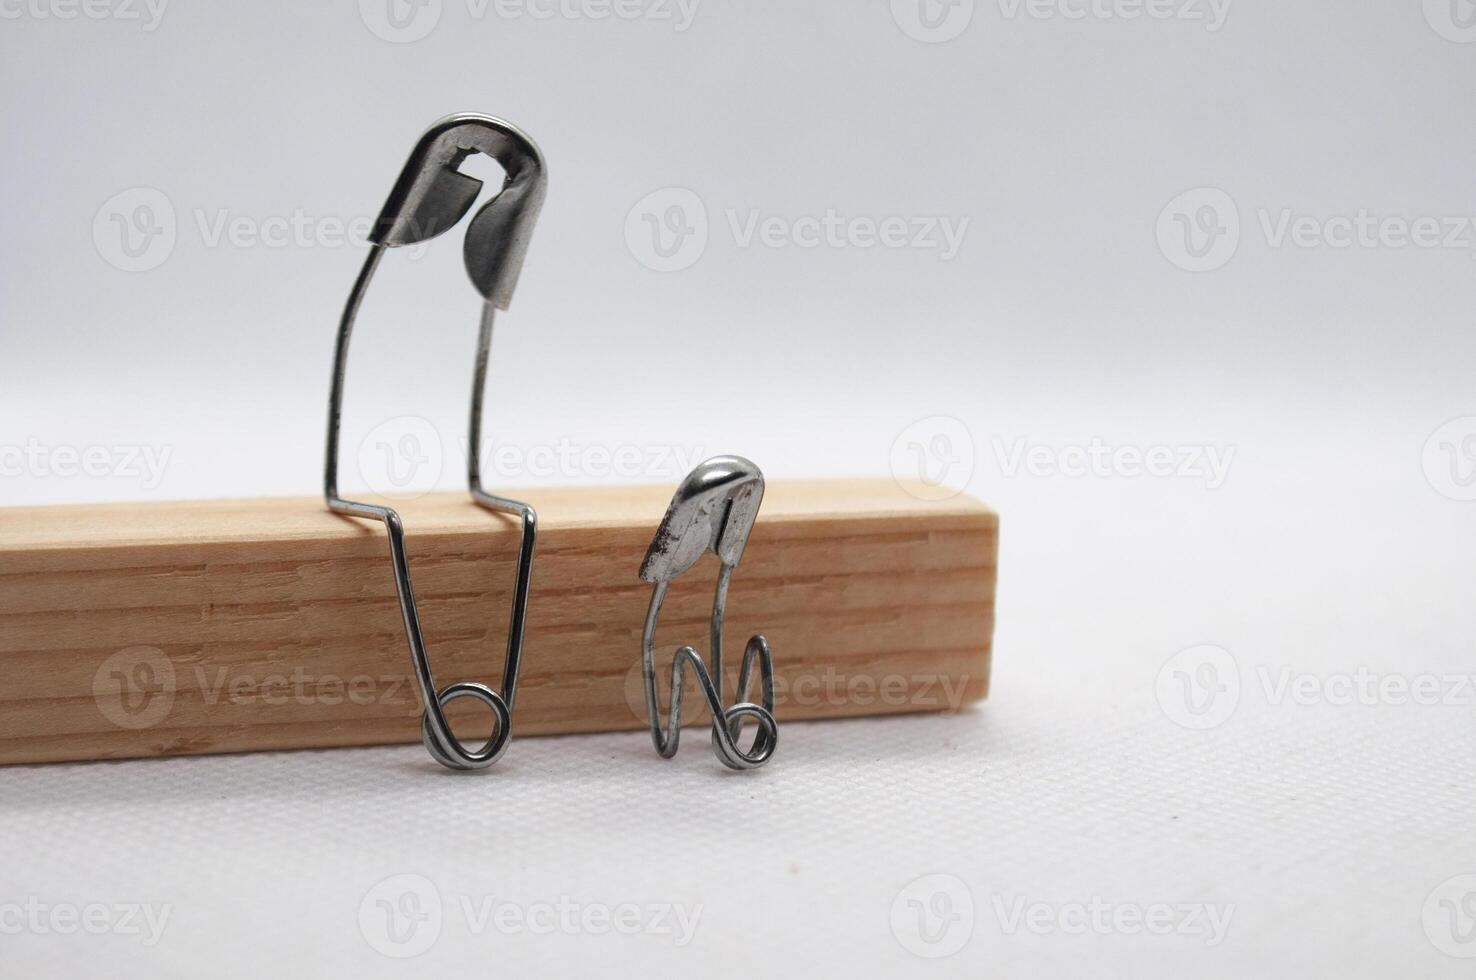 Model safety pin of mother or farther comforting his of her son. Family concept photo